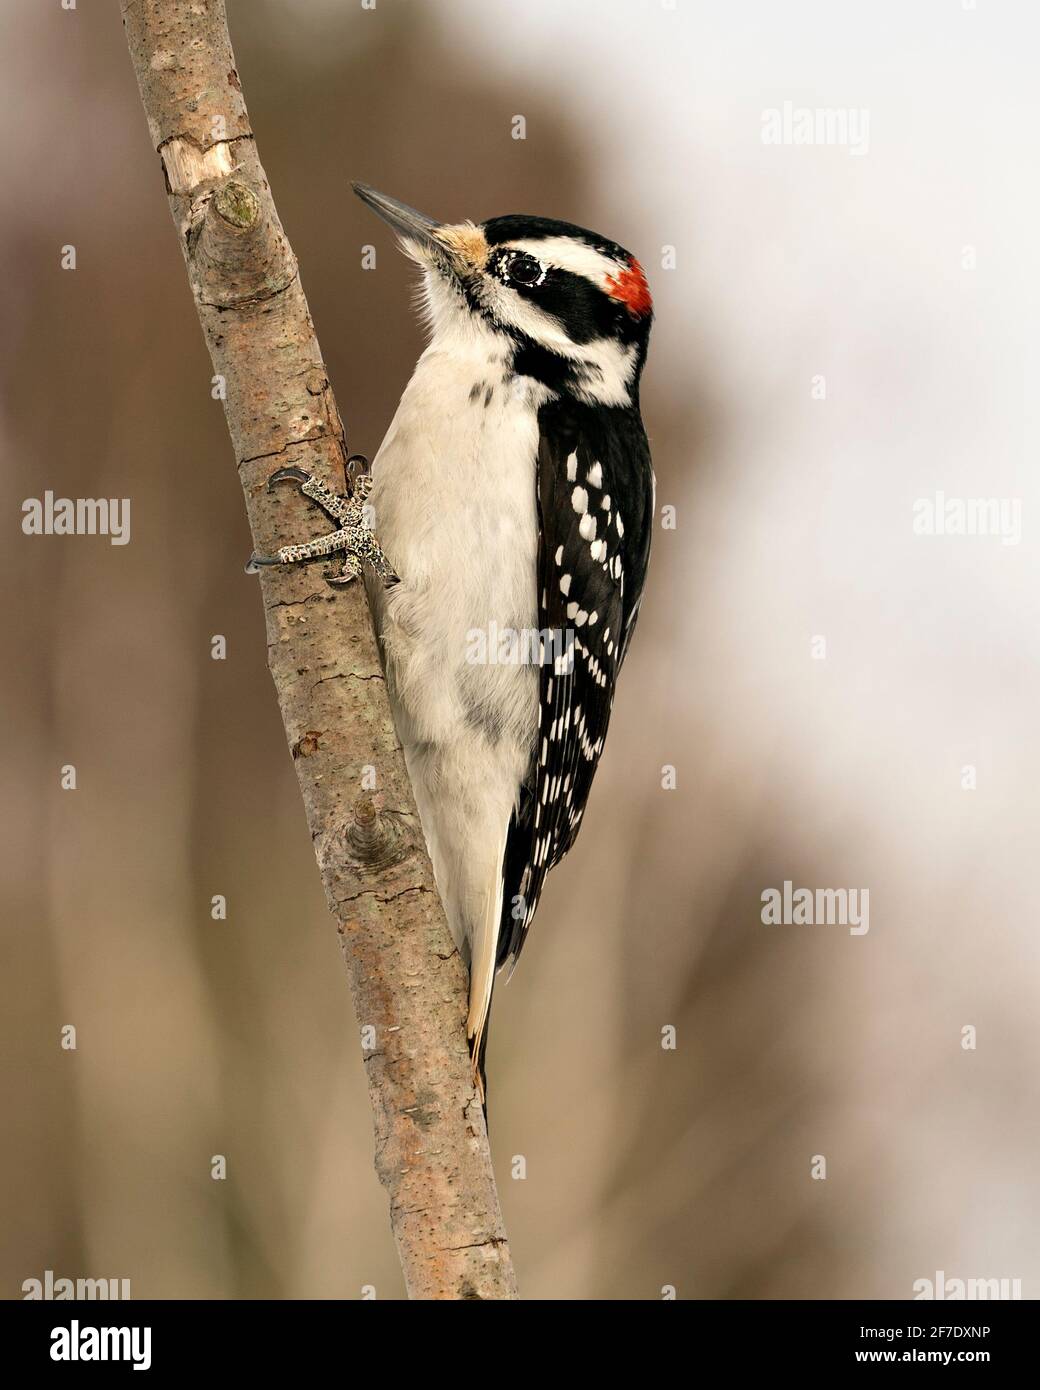 Woodpecker close-up profile view climbing tree branch and displaying feather plumage in its environment and habitat in the forest. Stock Photo